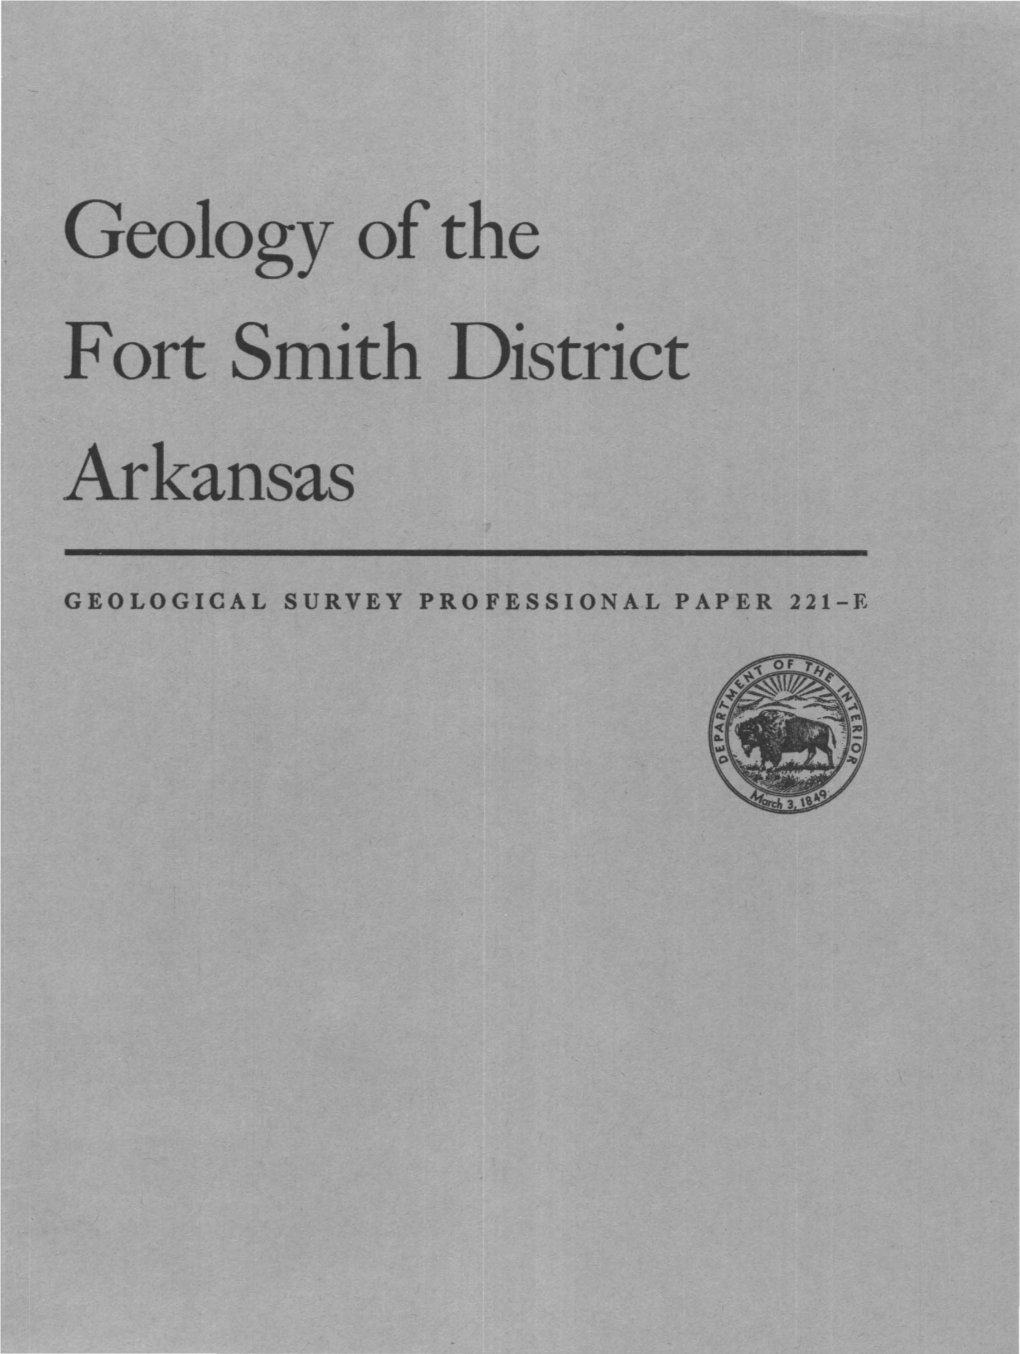 Geology of the Fort Smith District Arkansas